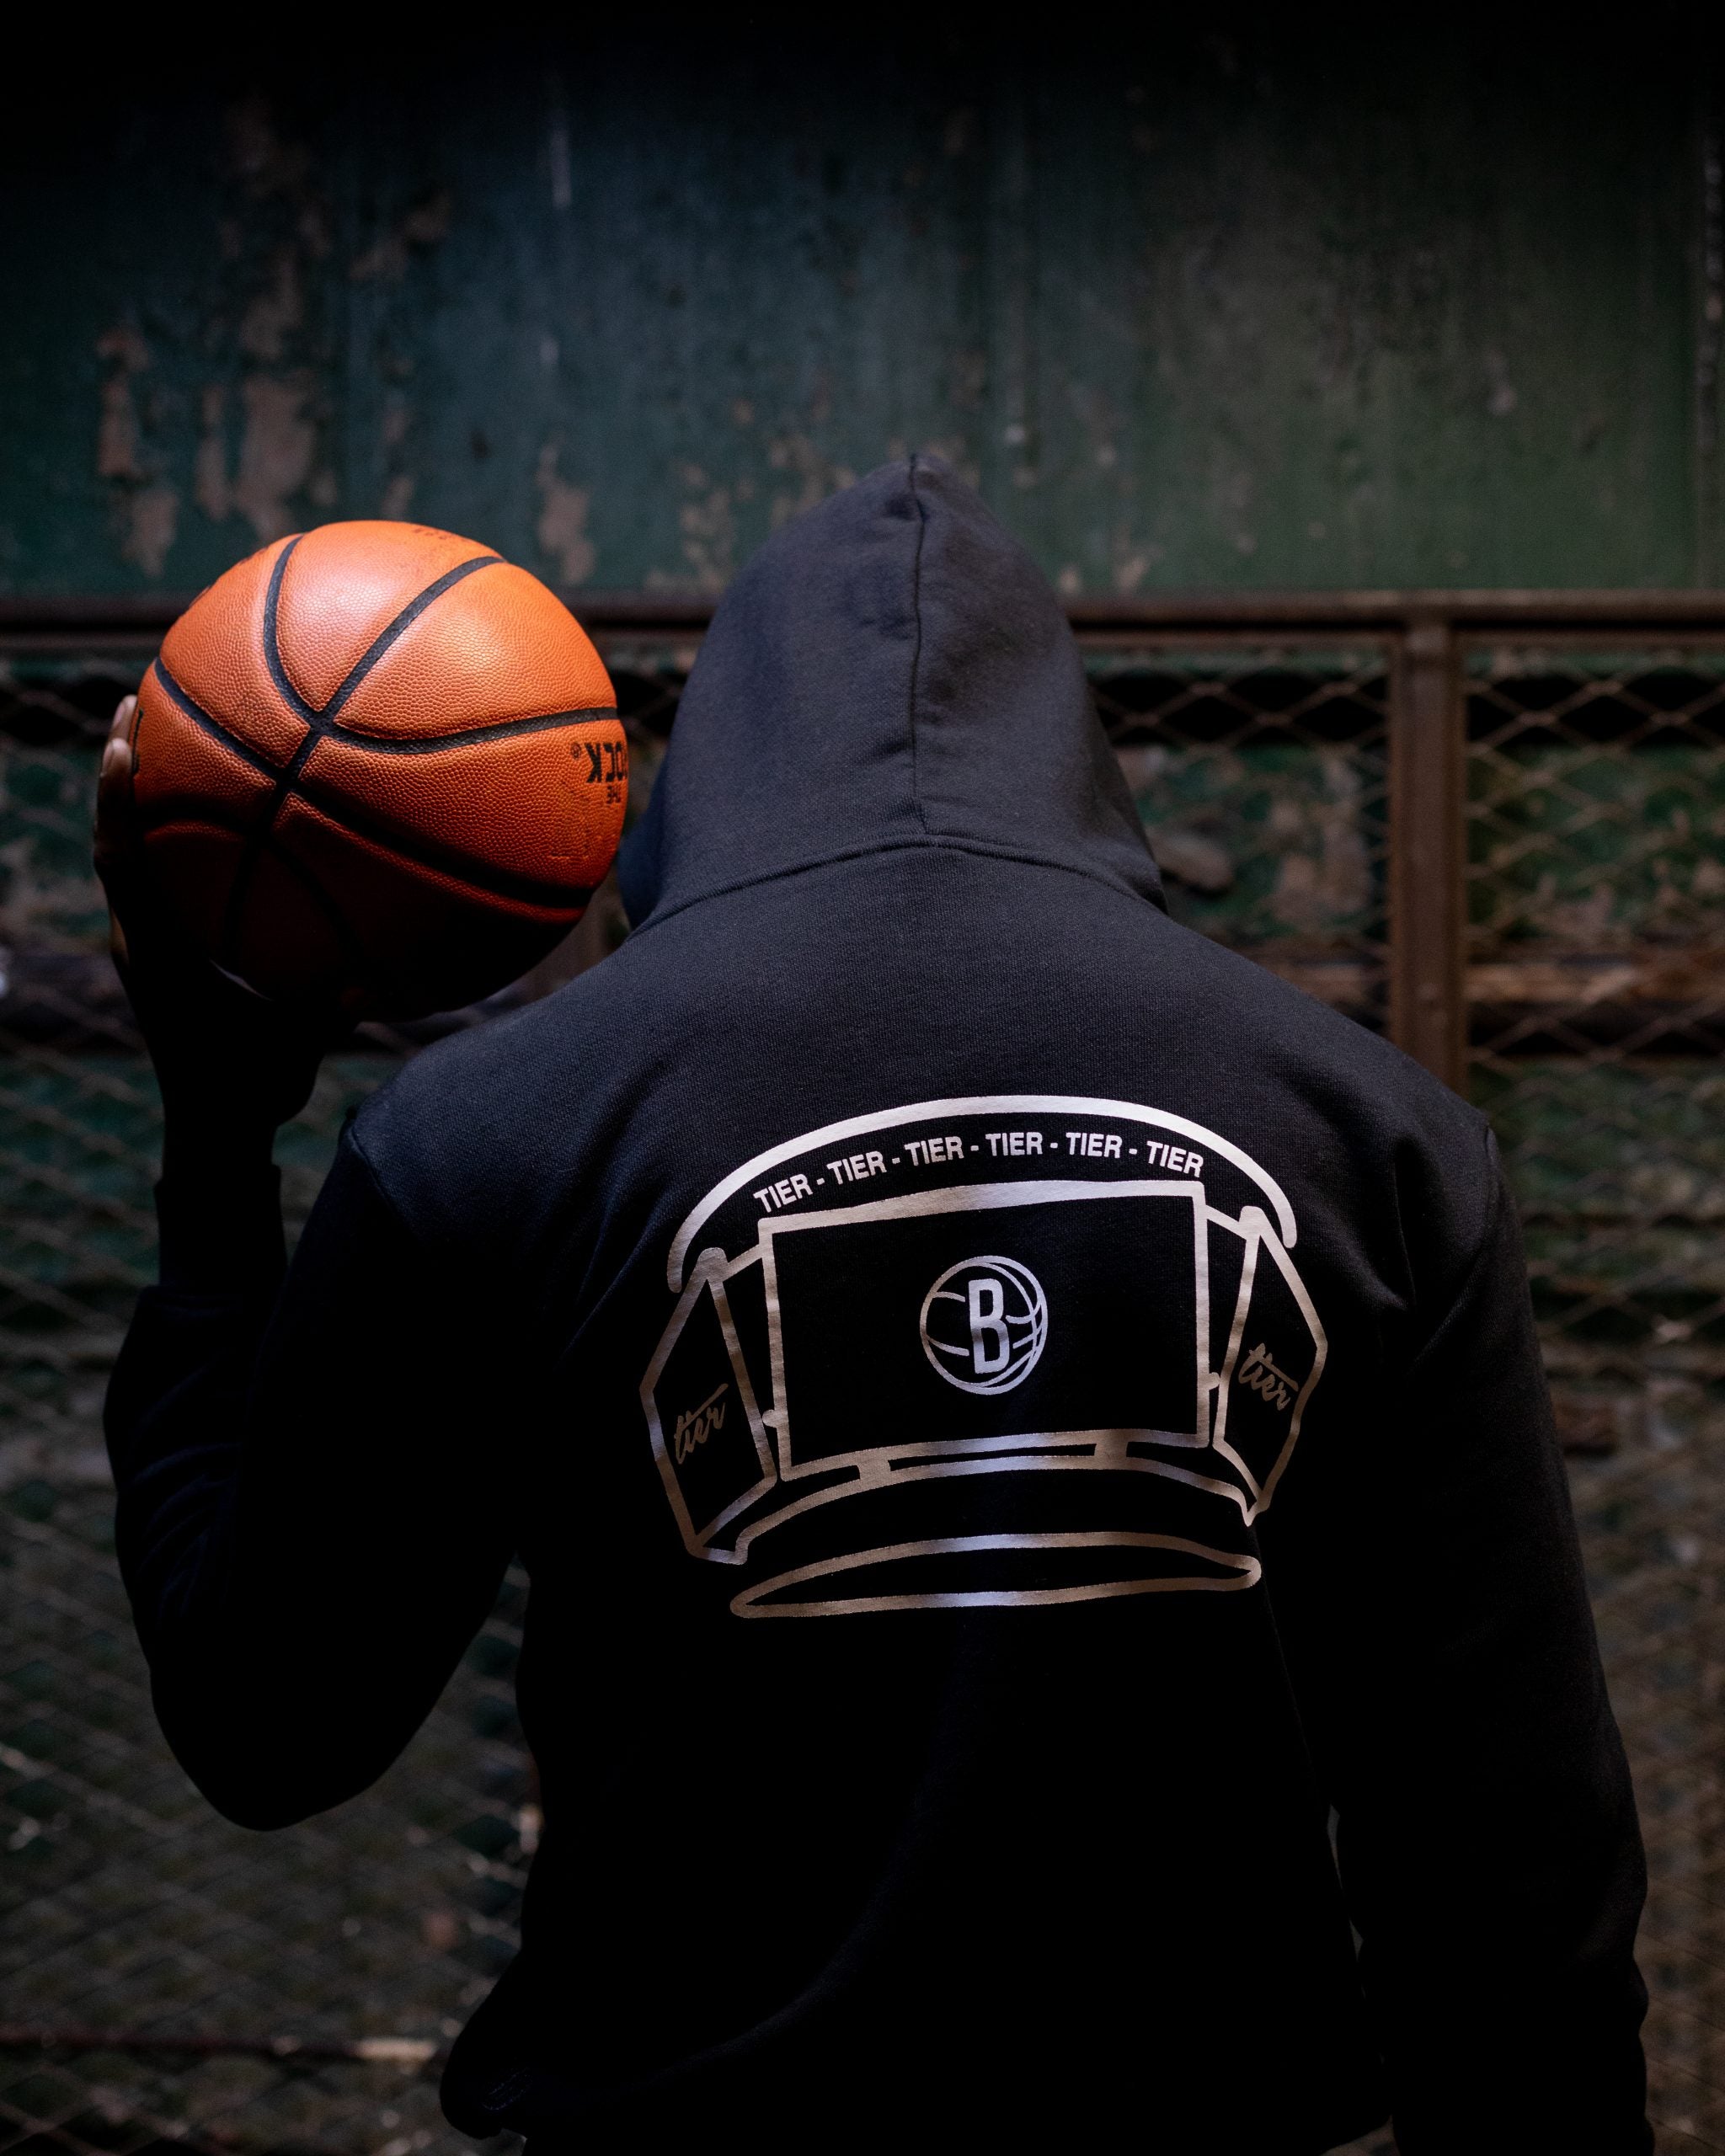 Brooklyn-Based Fashion Brand TIER Partners With Brooklyn Nets For Limited Collaboration Capsule